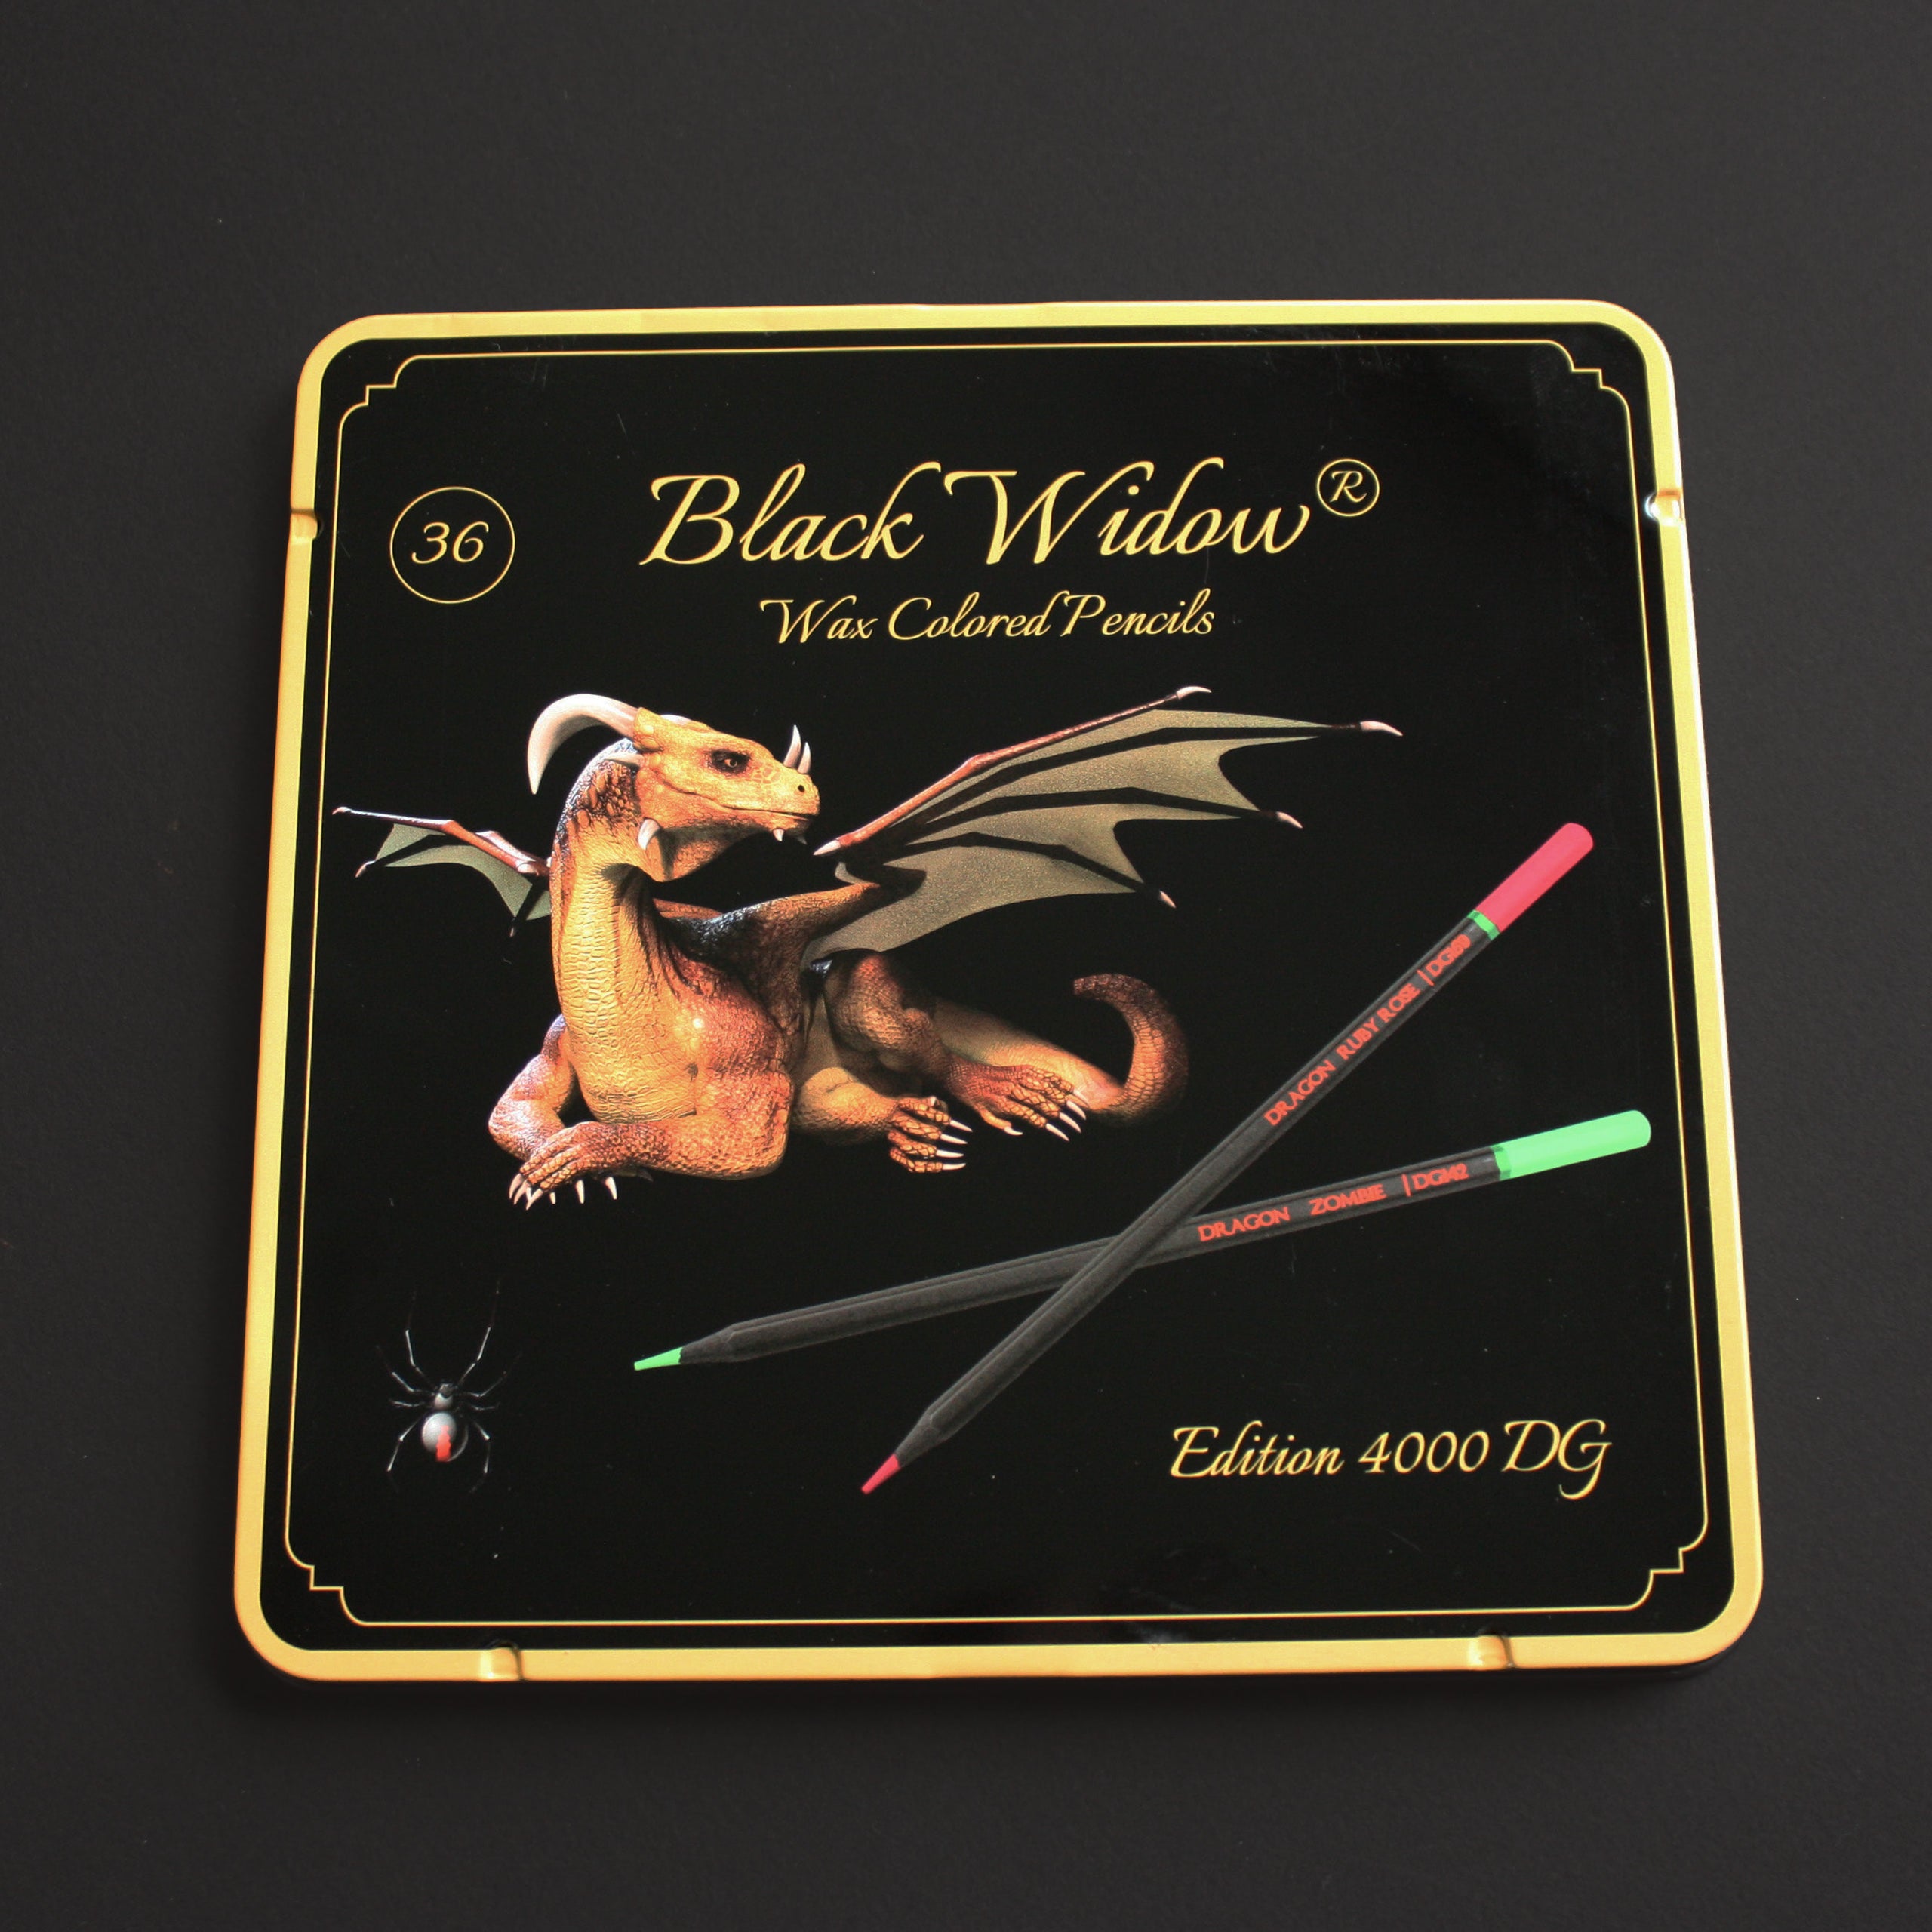 Swatching Black Widow's Latest Release  Dragon Series Colored Pencils 